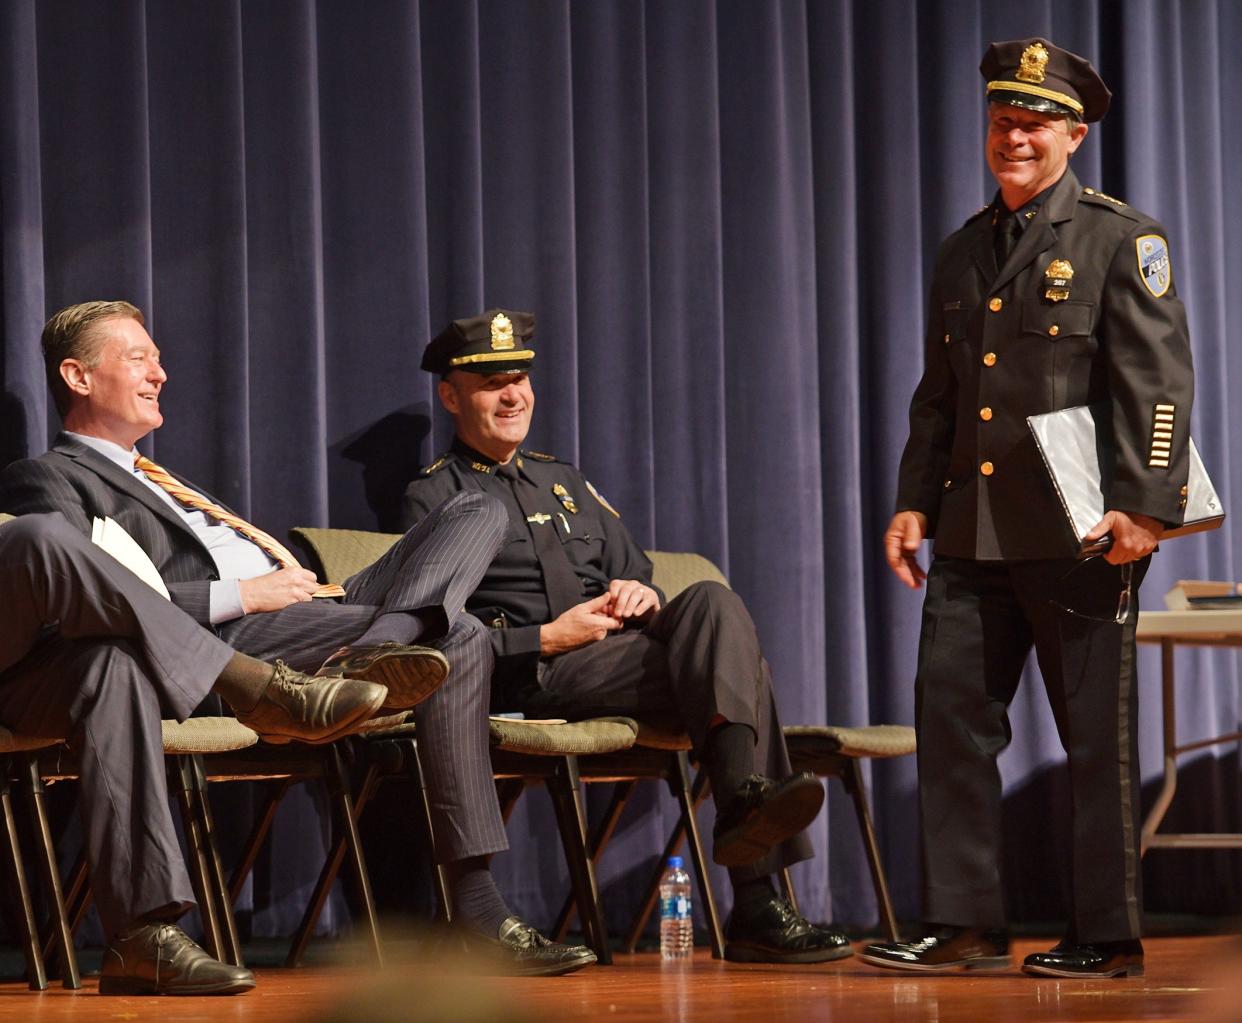 In 2021, Police Chief Steven Sargent, right, shares the stage with City Manager Ed Augustus, left, at a Police Department awards ceremony.